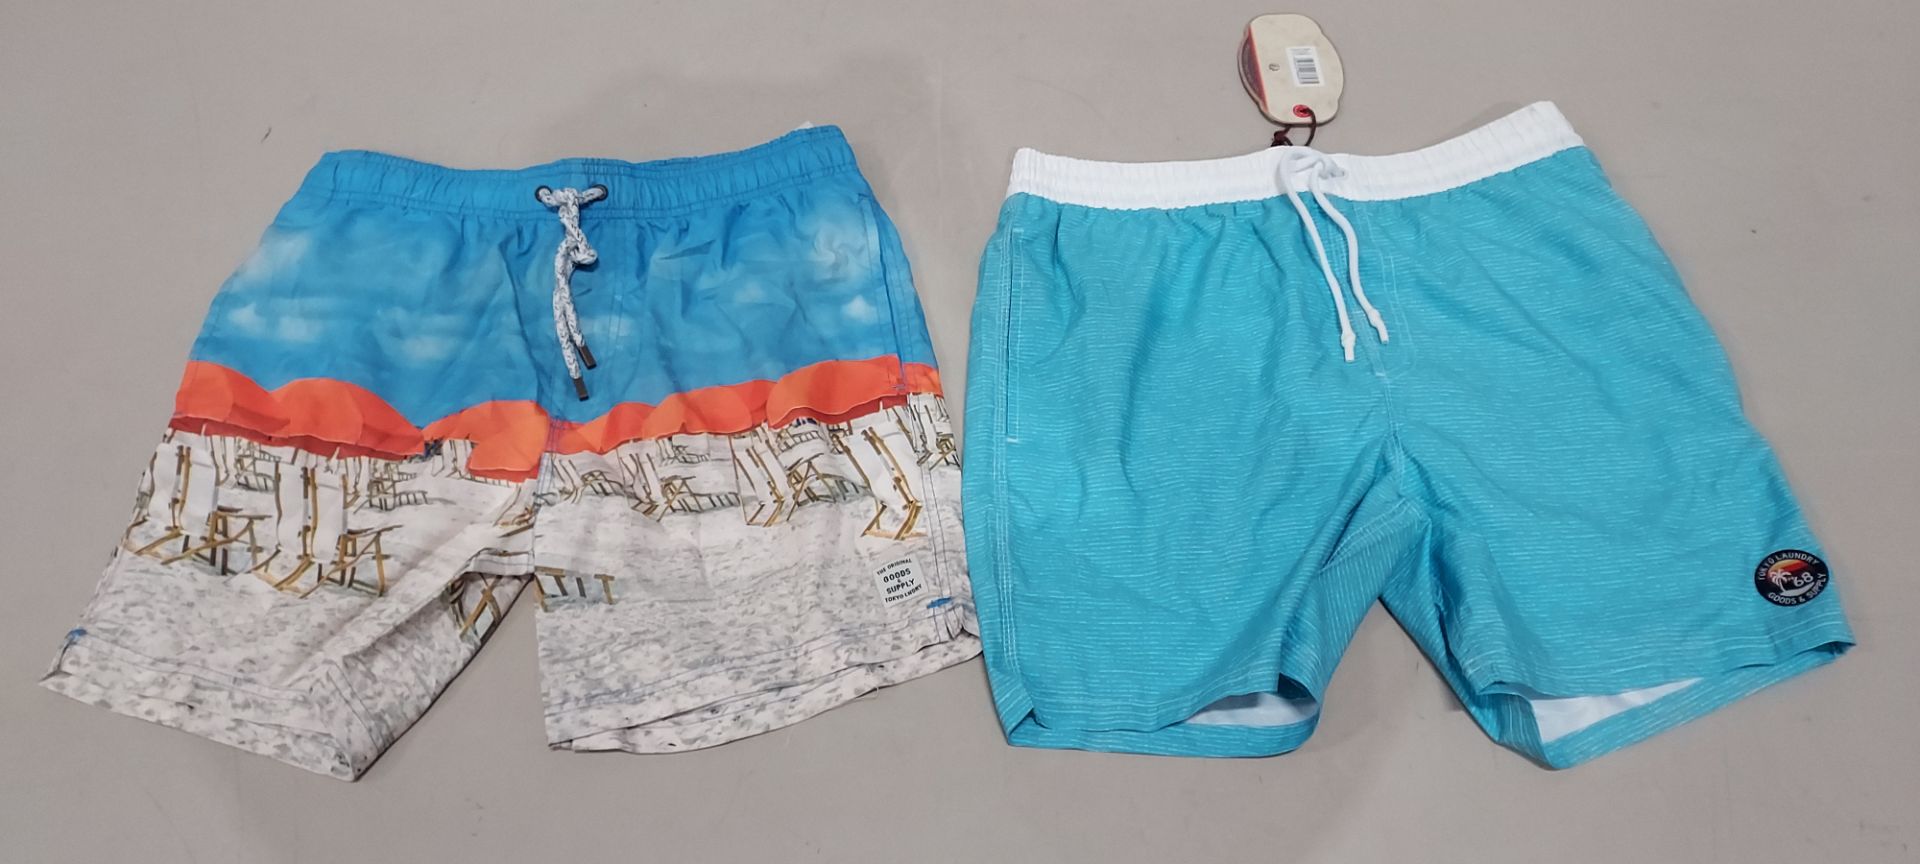 16 X BRAND NEW TOKYO LAUNDRY SWIMMING SHORTS IN MIXED STYLES & SIZES (RRP £18.99 EACH TOTAL £302 )